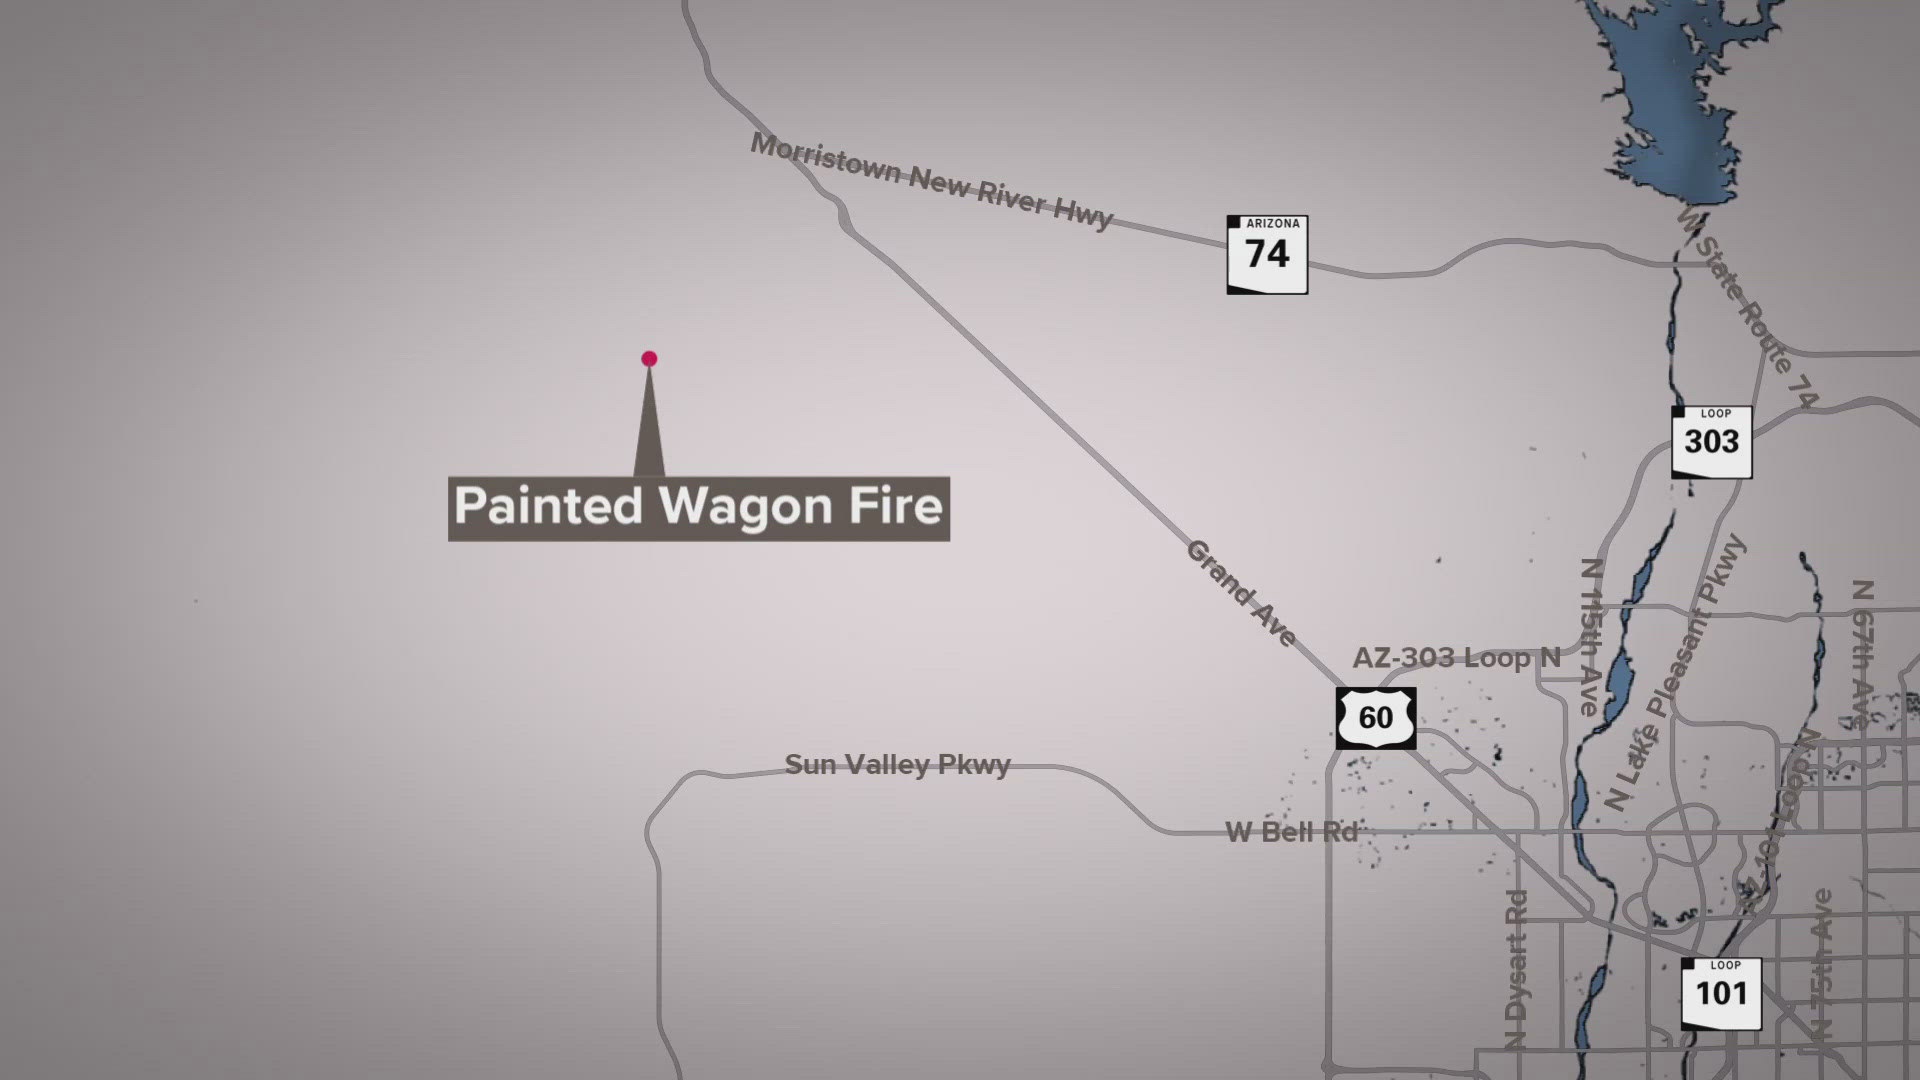 The fire is estimated to be 50-100 acres, the Arizona Department of Forestry and Fire Management said.